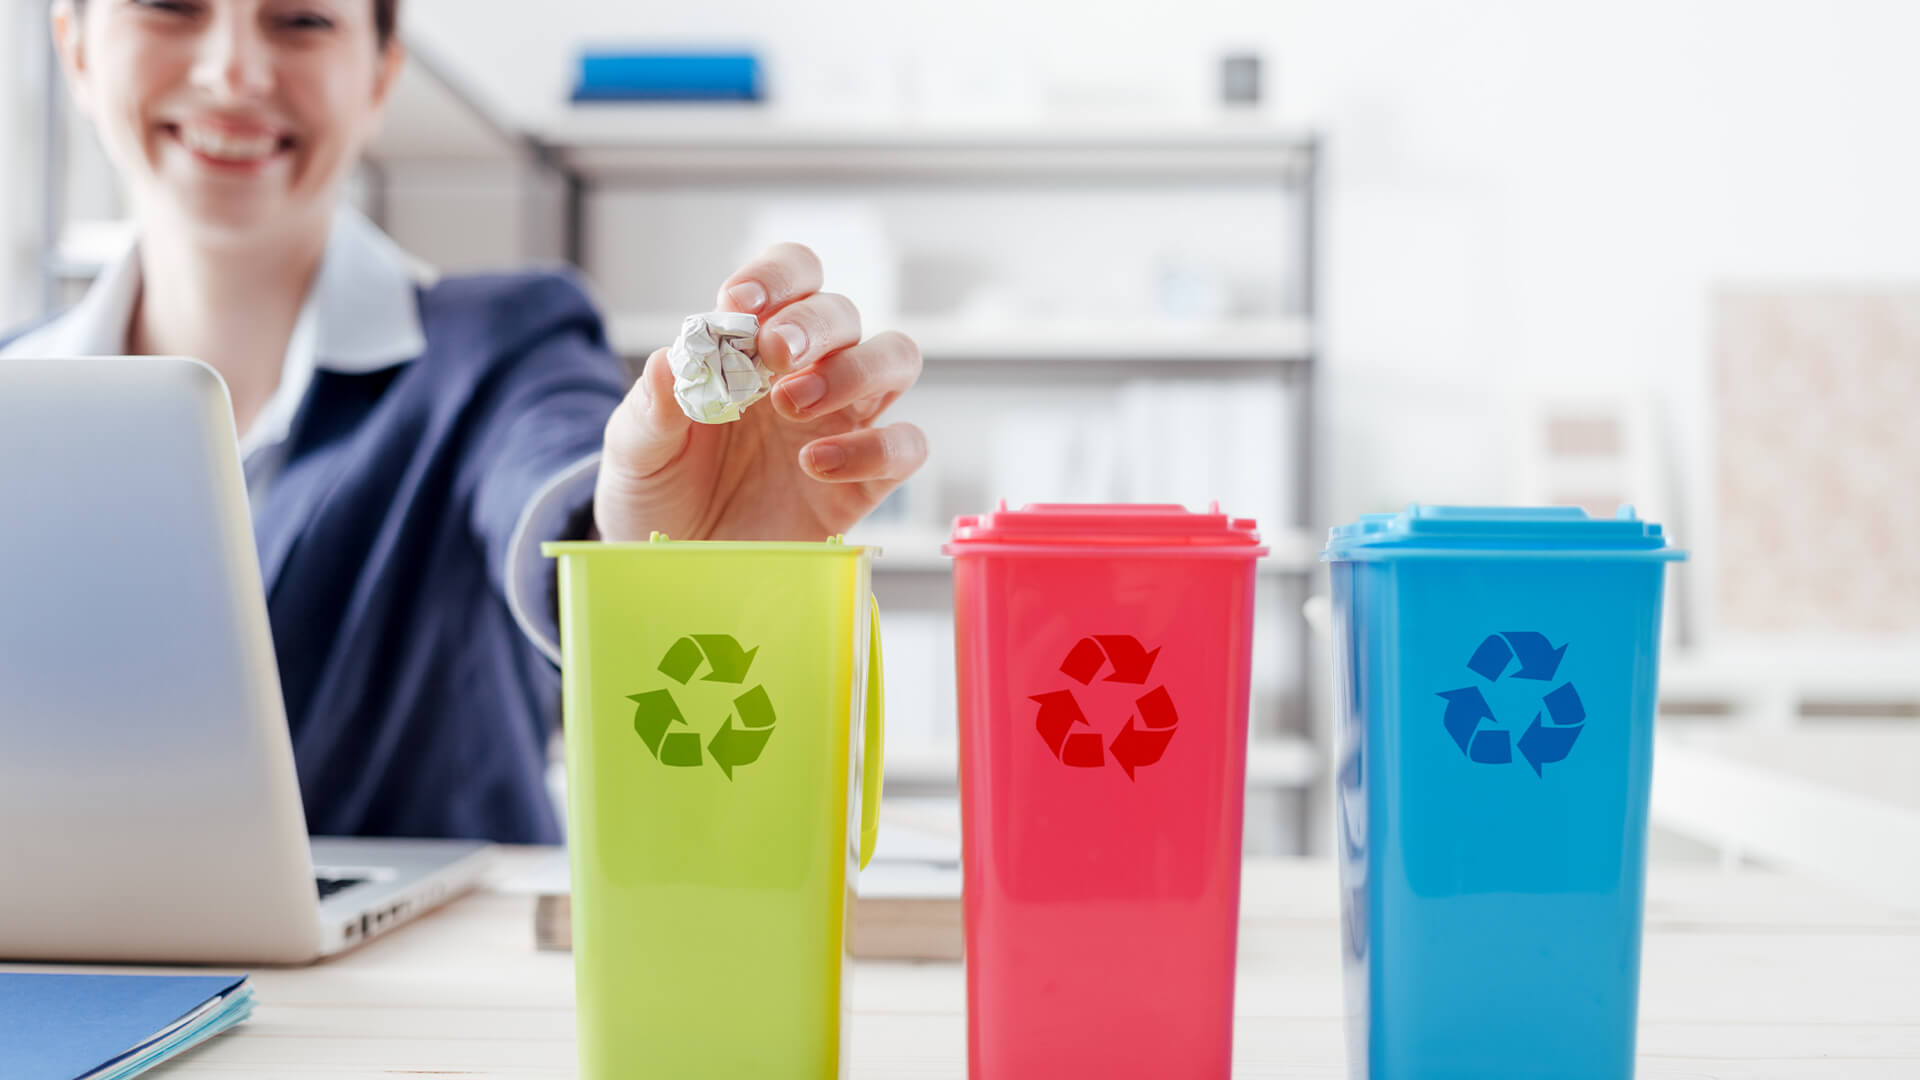 How to encourage staff to recycle in 2019